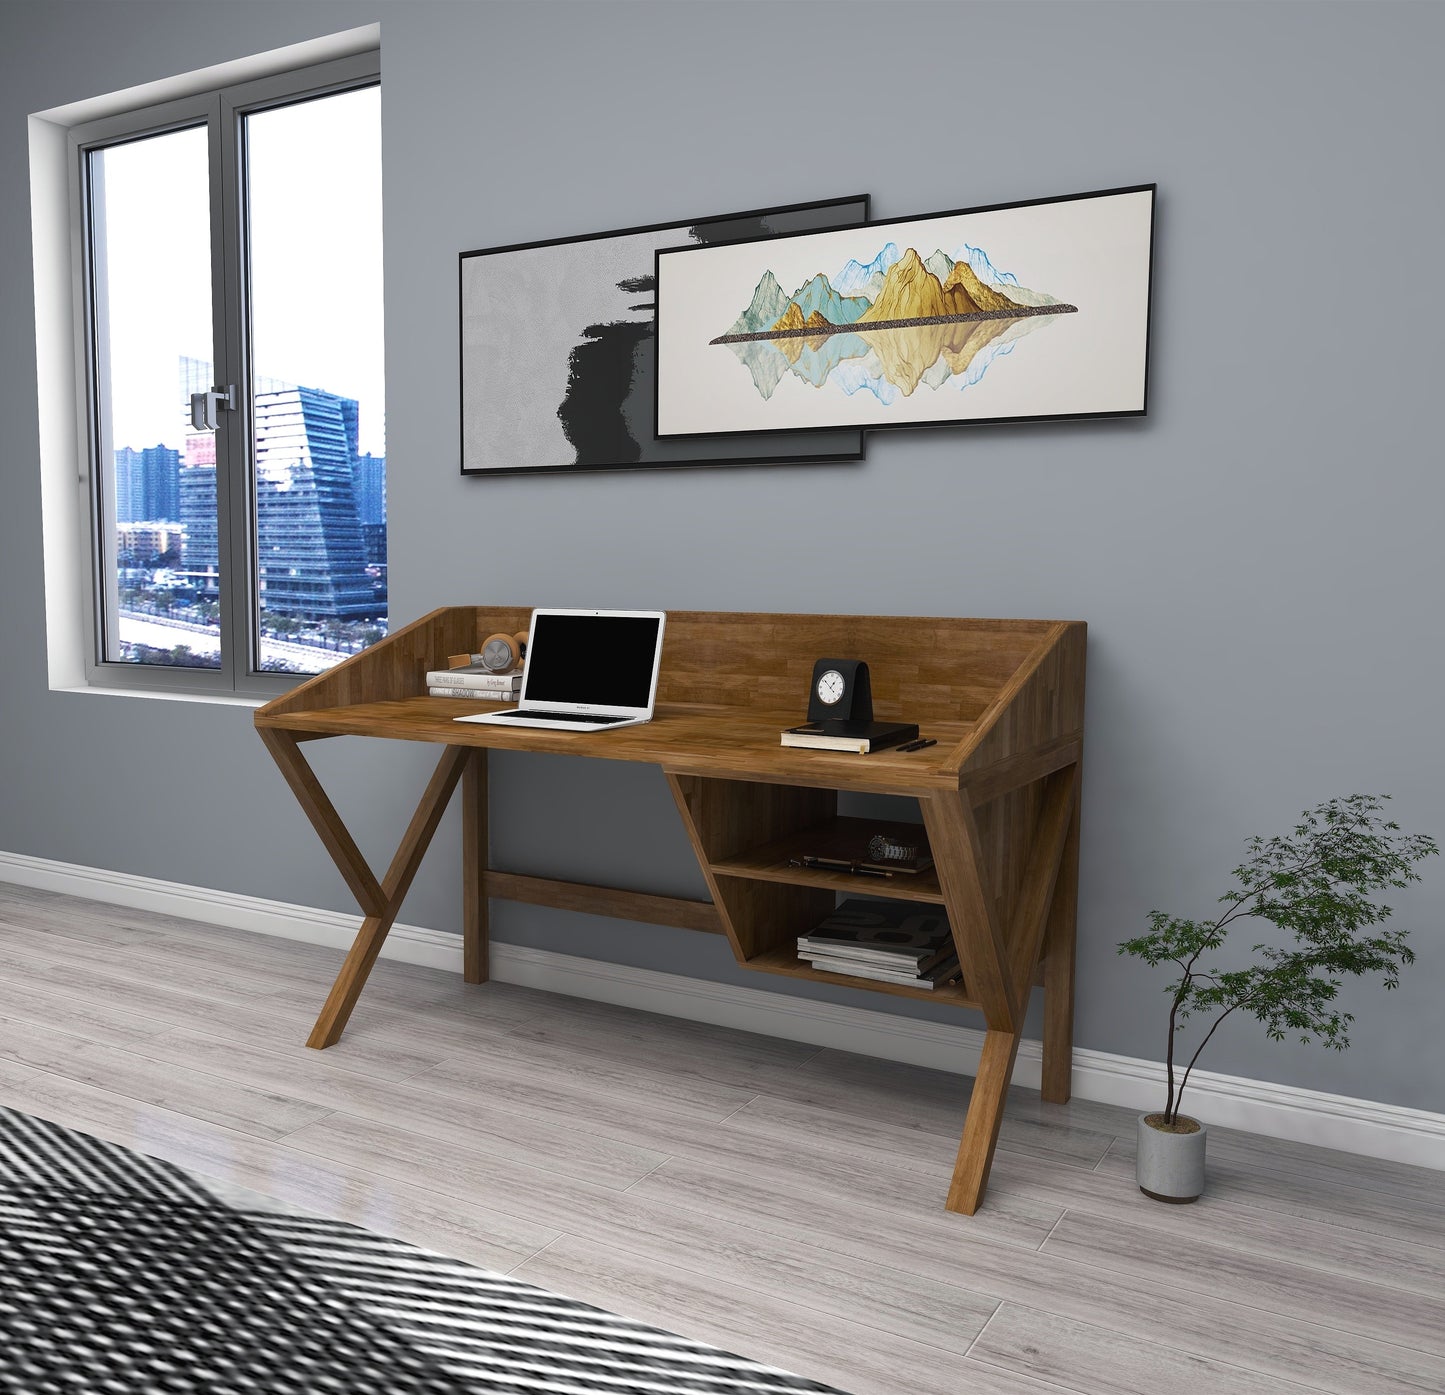 Ivo Solid Pine Wood Handmade Computer Desk with Front Bar and Shelves